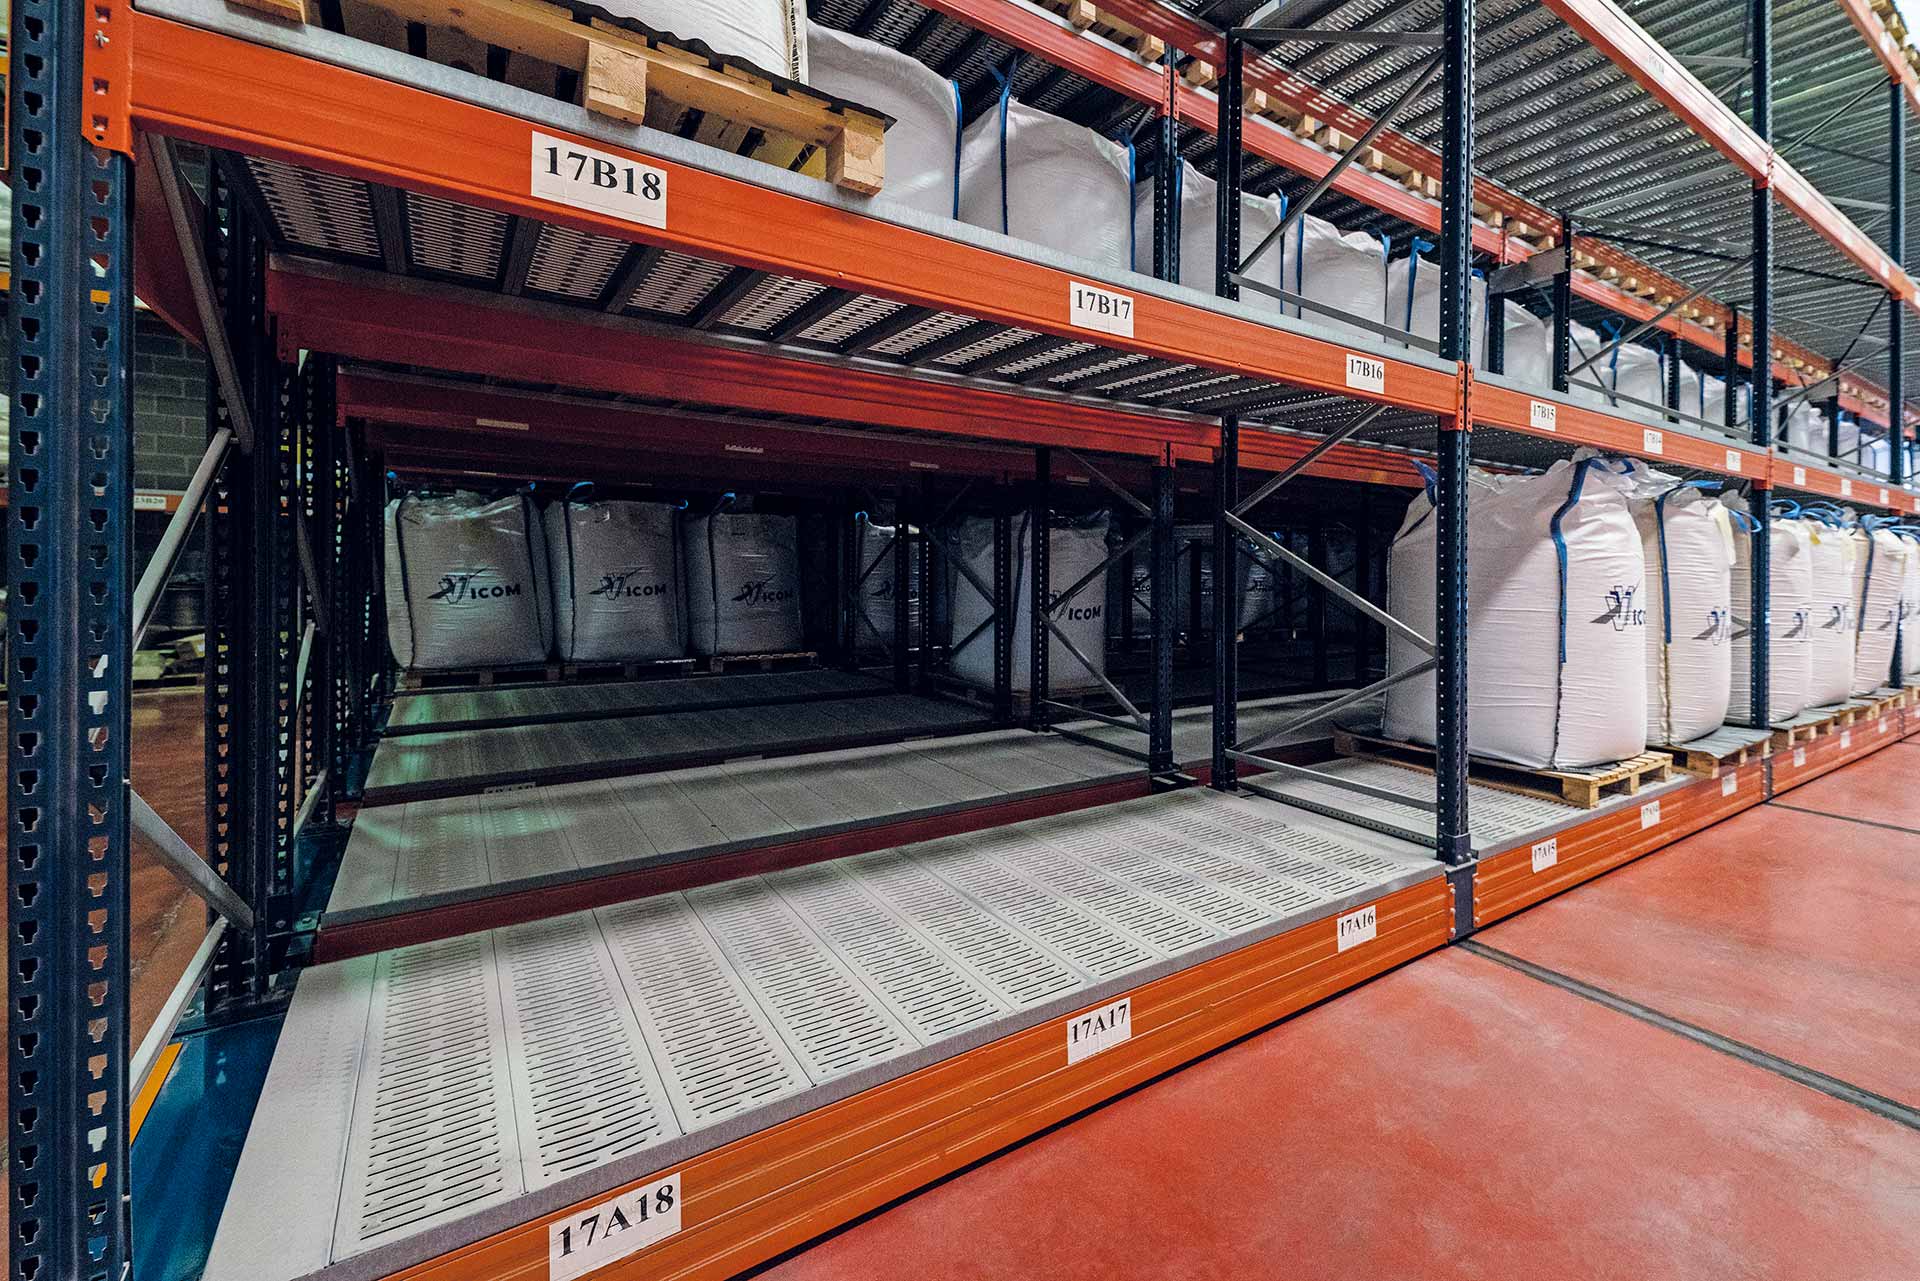 The mobile pallet racks can include different shelf panels for loads: e.g. metal or grate, among others